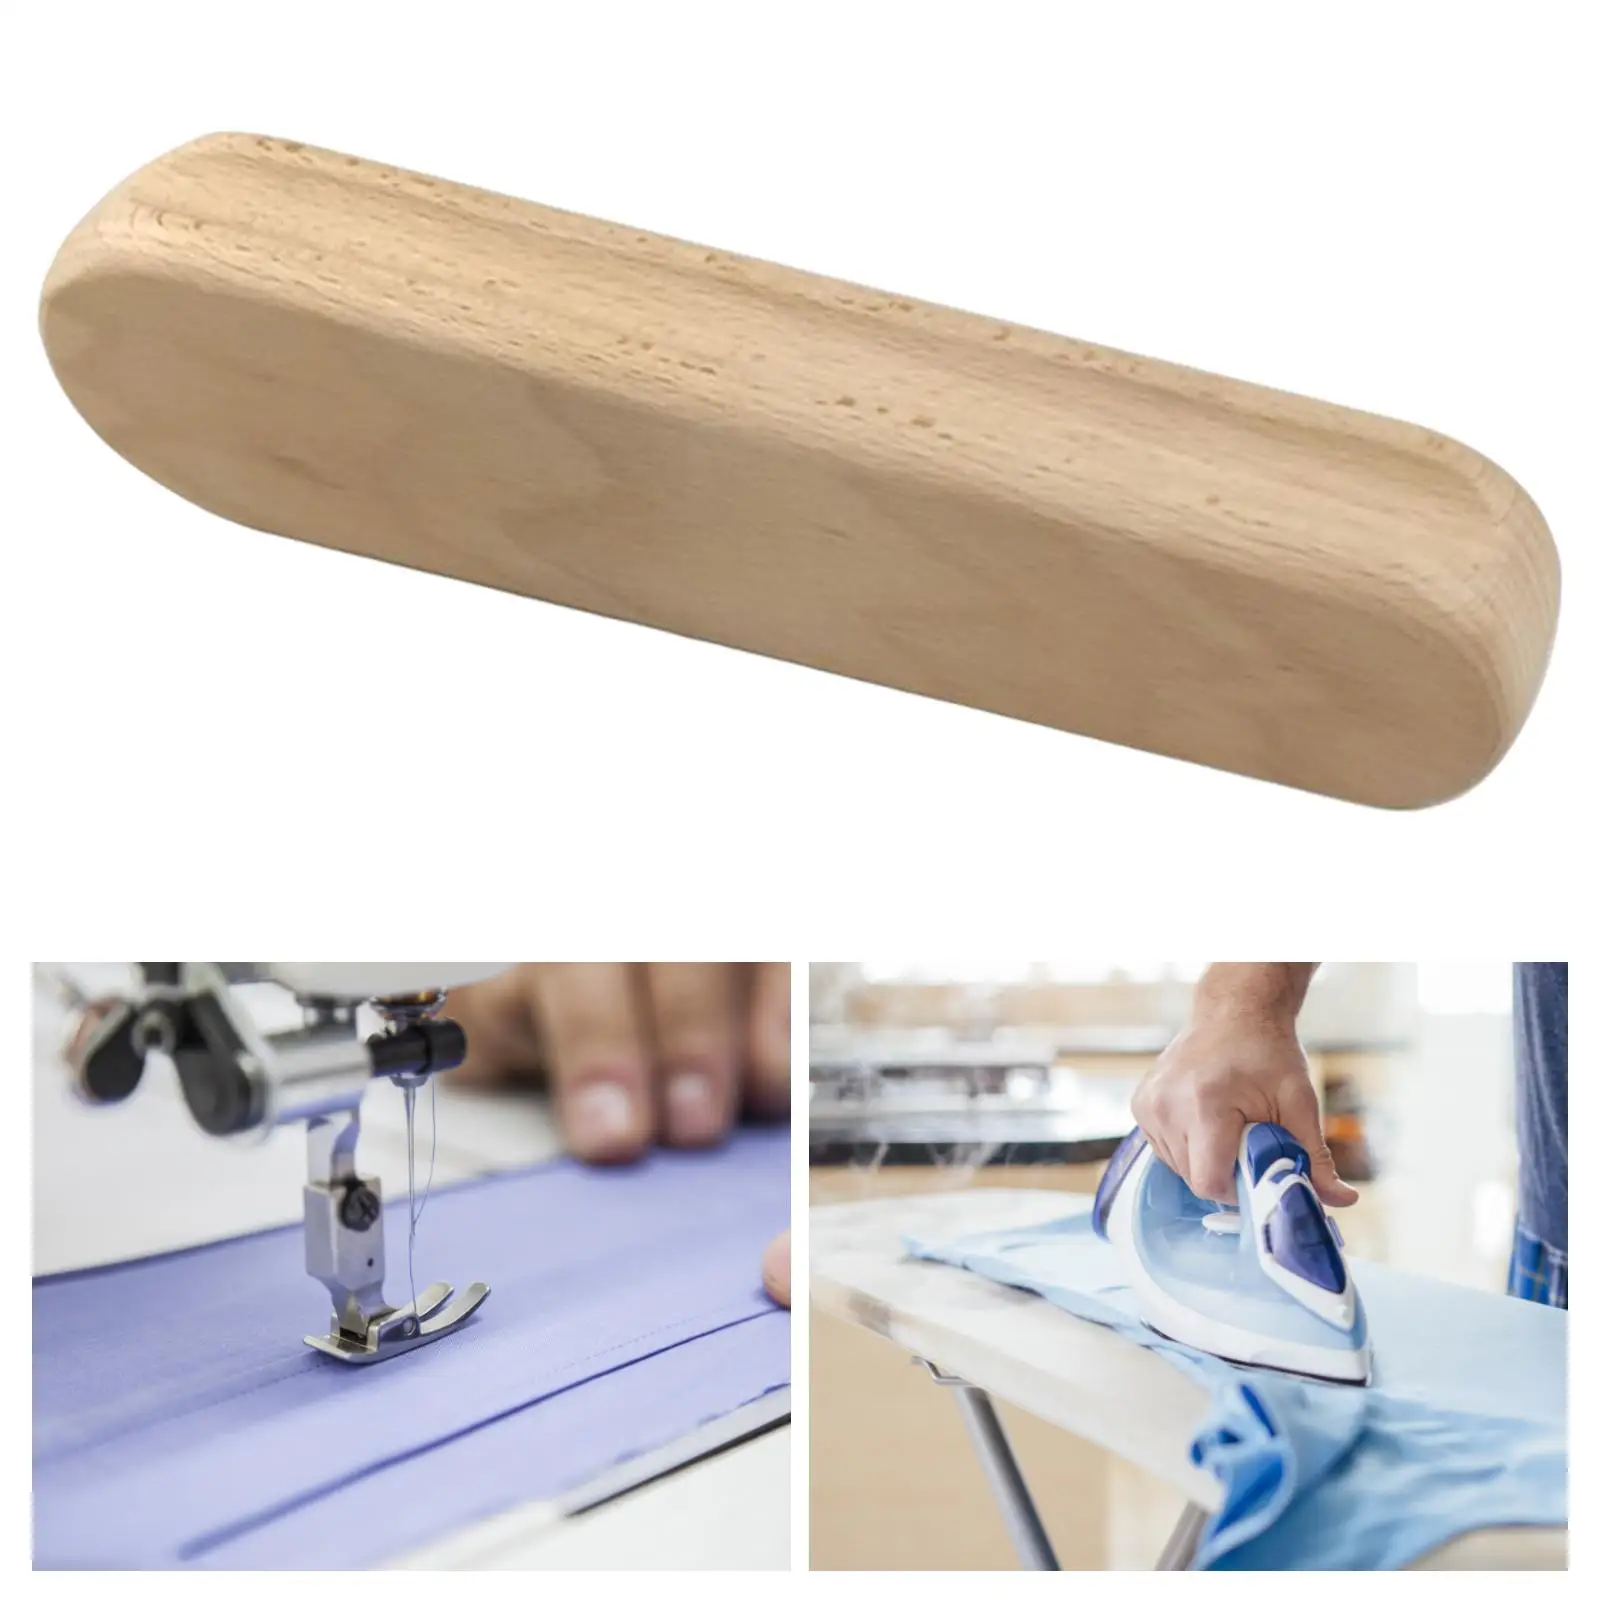 Wooden Tailors Clapper Large Handheld Seam Flattening Tool 24cm Professional Clapper for Sewing Ironing Embroidery Quilting